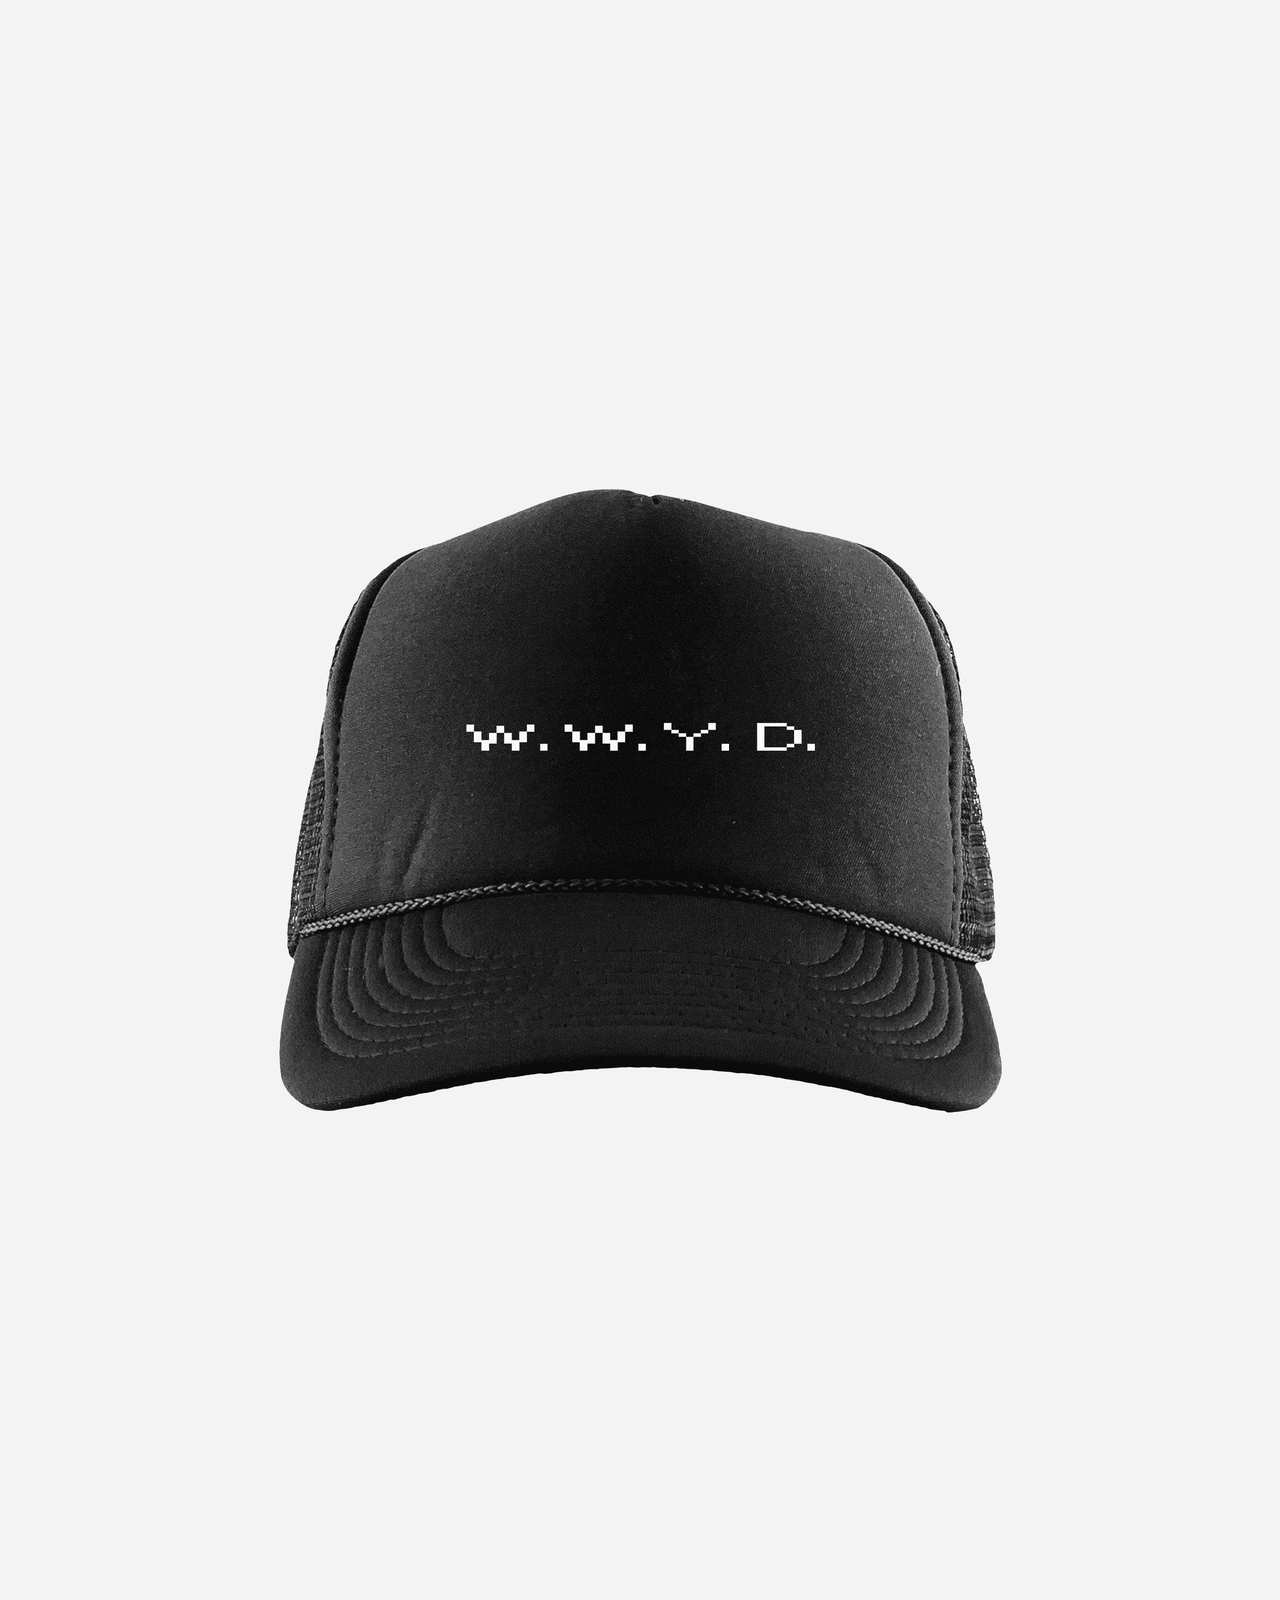 Christian Trucker Hats, Dad Hats & Totes